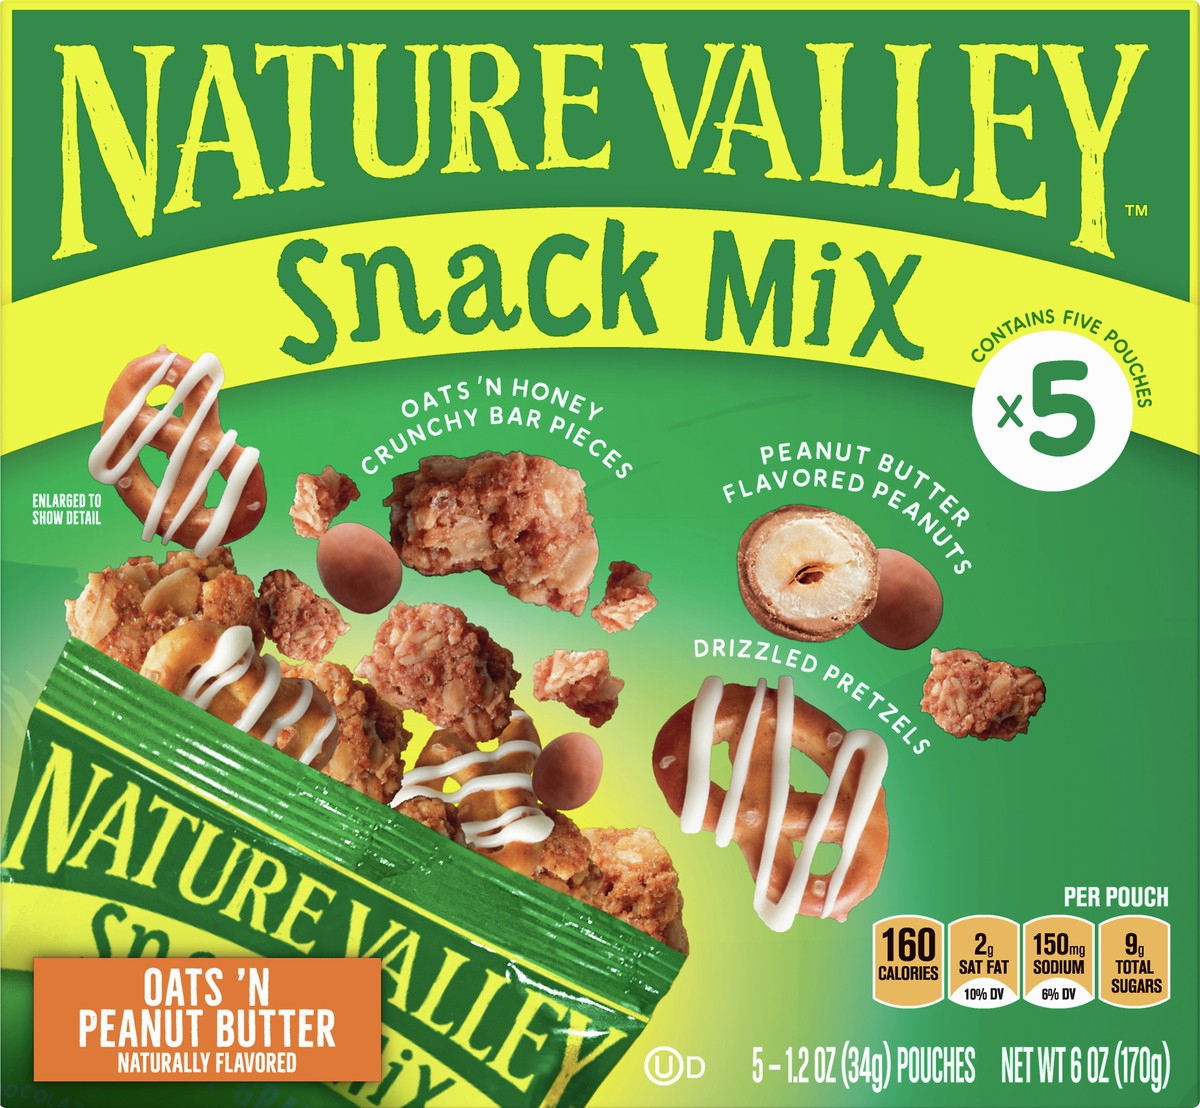 slide 6 of 9, Nature Valley Oats 'N Peanut Butter Snack Mix 5 ea, 5 ct; 1.2 oz